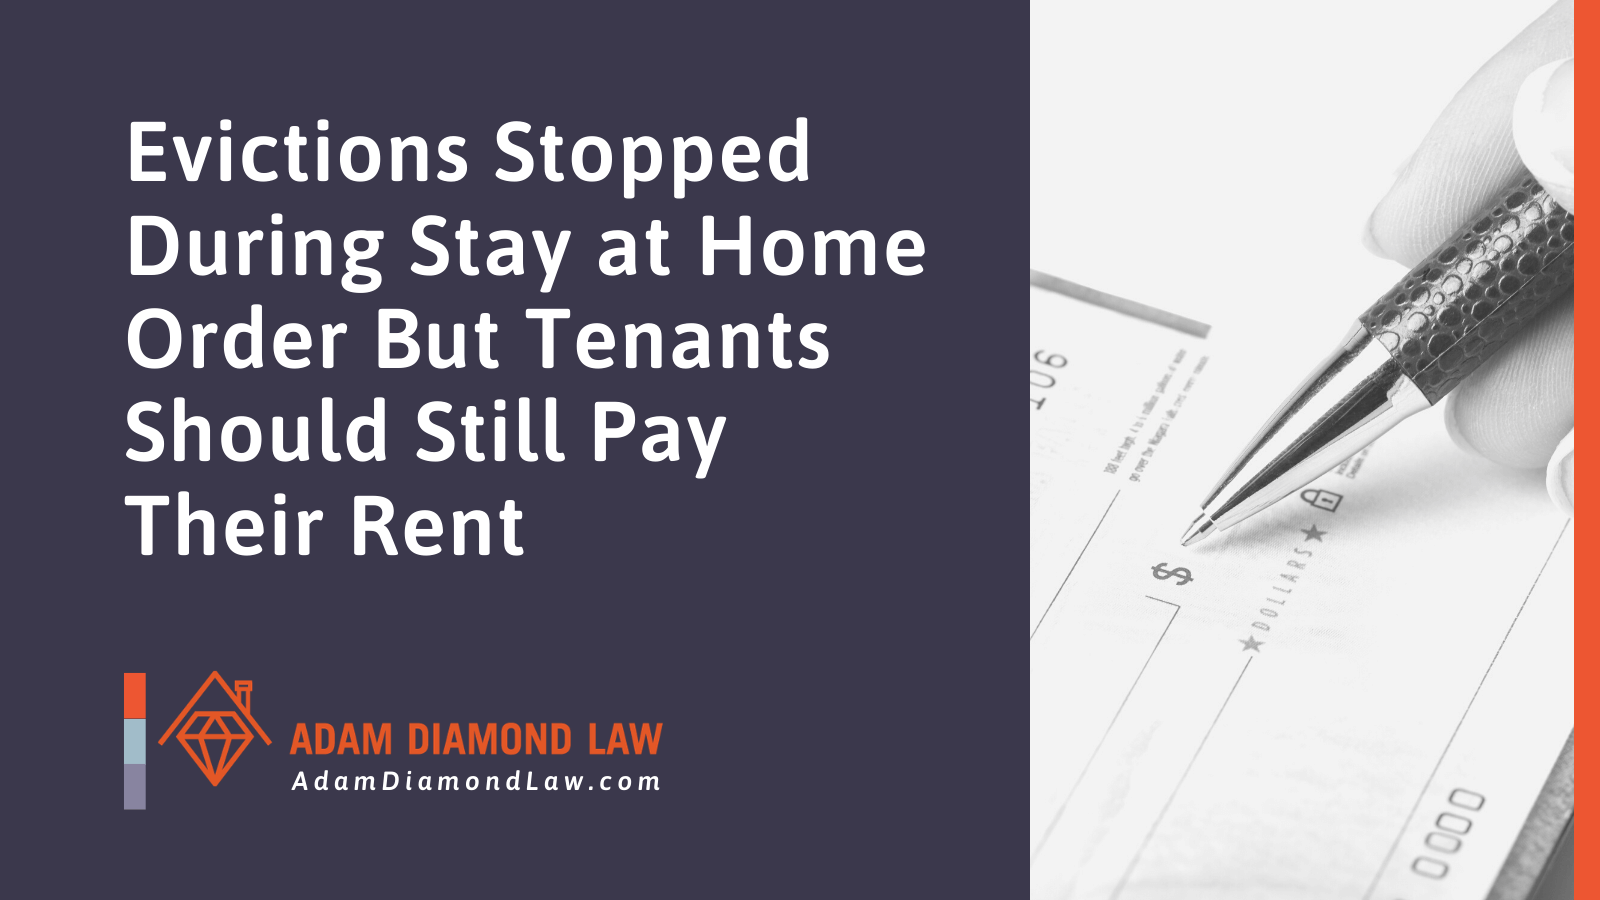 Evictions Stopped During Stay at Home Order But Tenants Should Still Pay Their Rent - Adam Diamond Law | McHenry, IL Residential Real Estate Lawyer